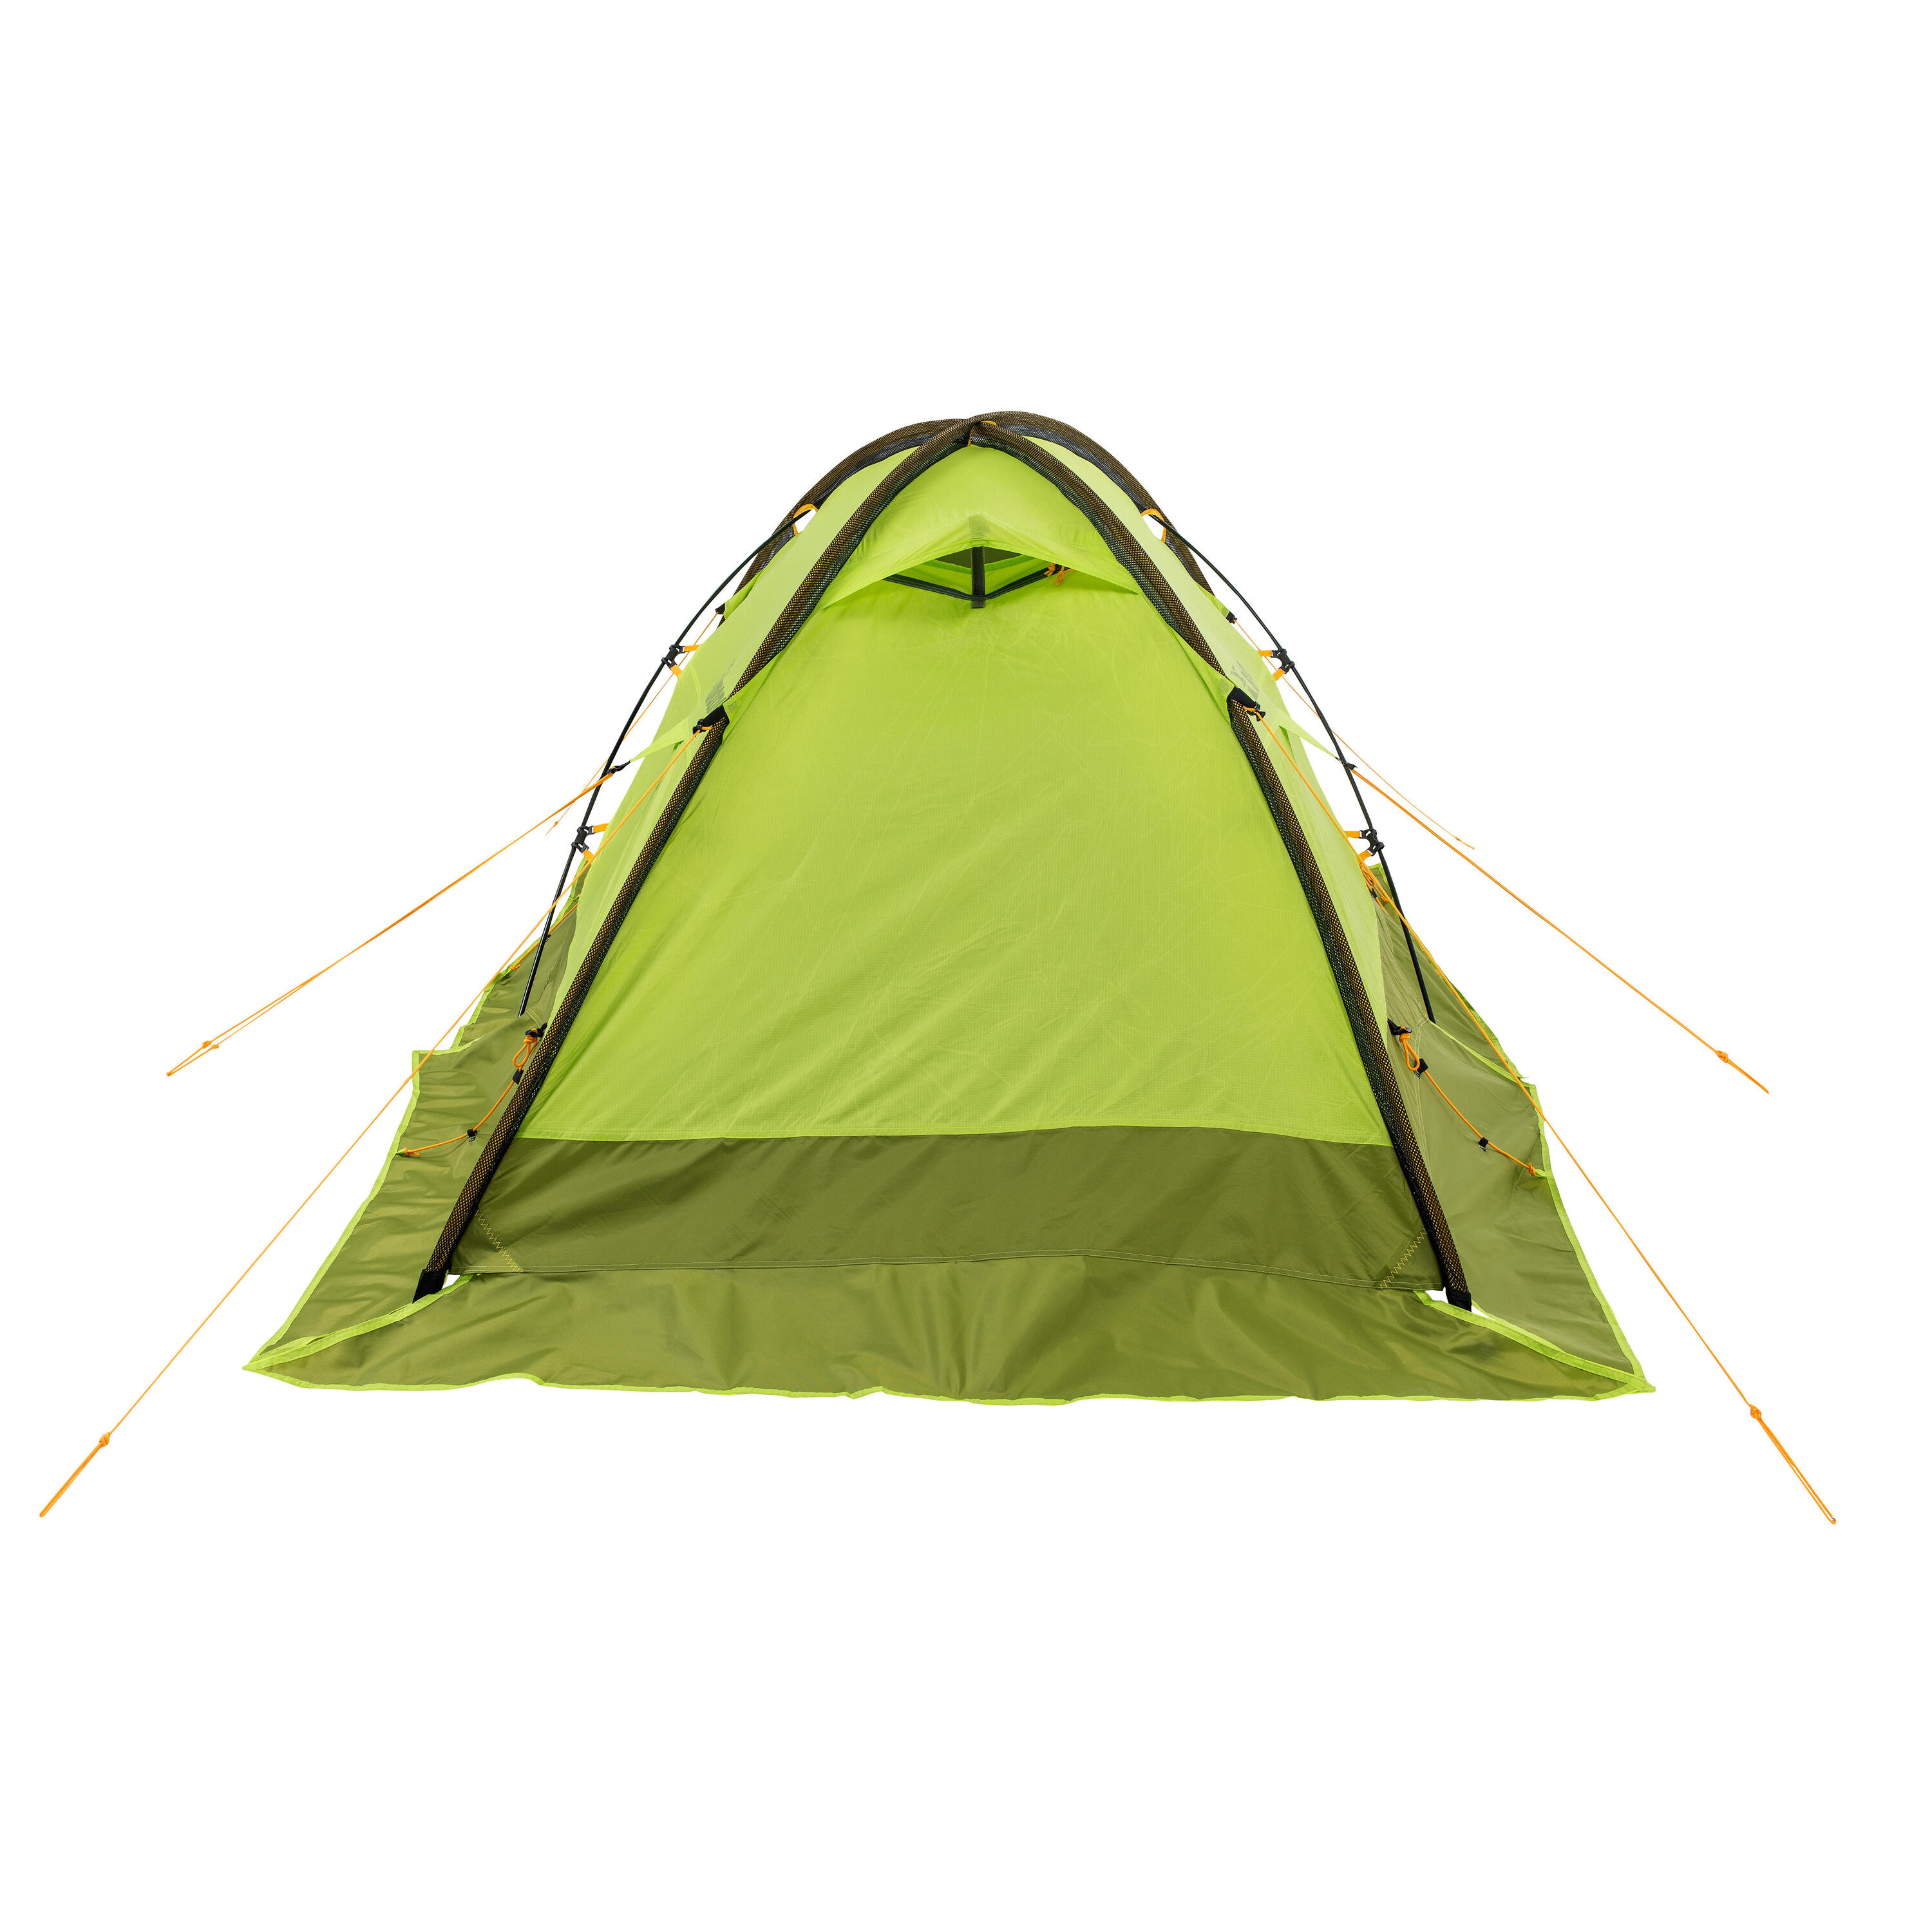 2-person mountaineering tent - Makalu T2 4/8